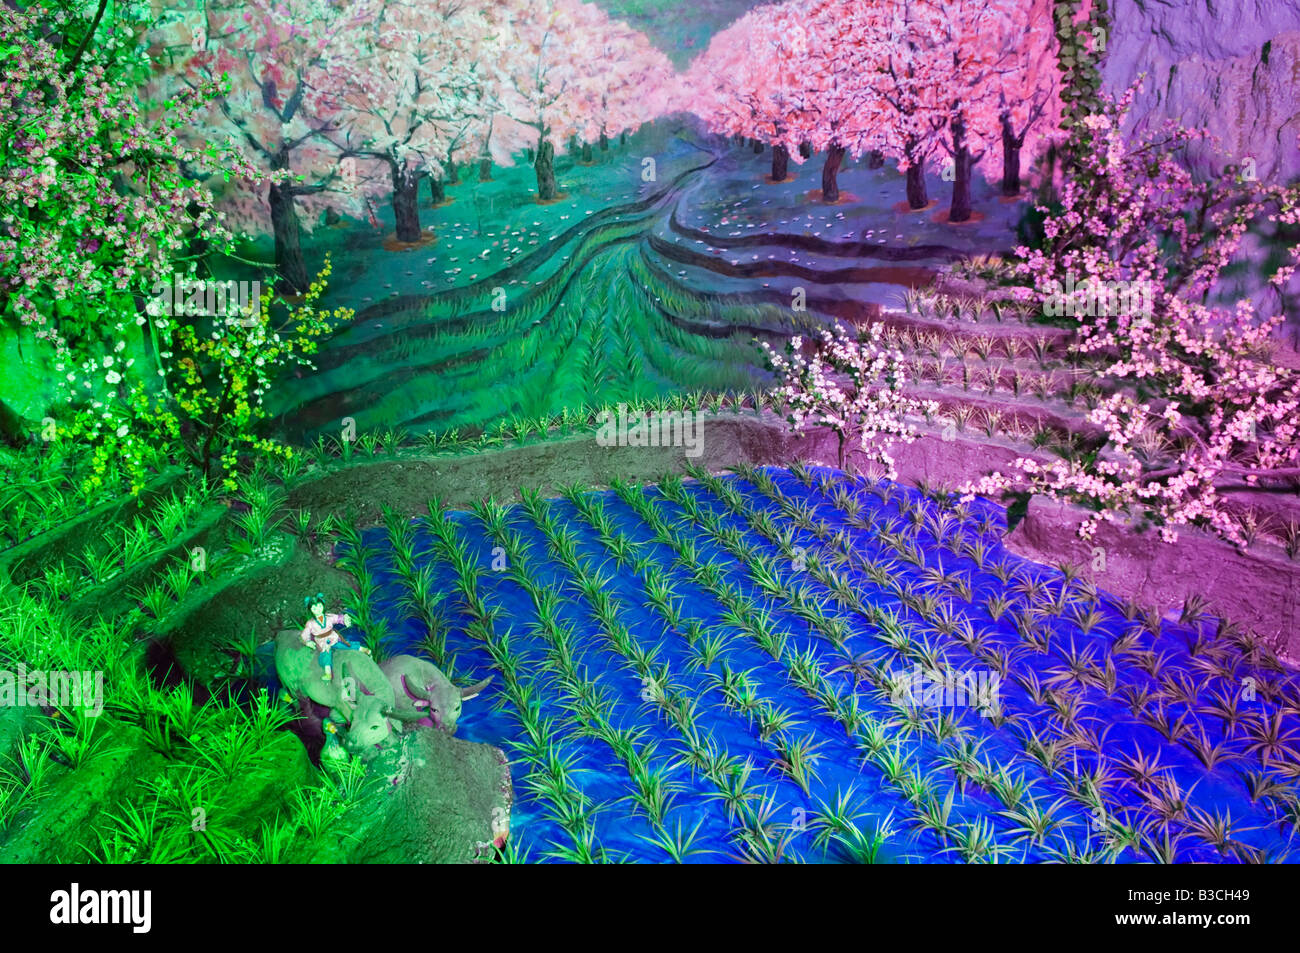 China, Beijing, Longqing Gorge Tourist Park. A model display of rice fields and spring blossom. Stock Photo